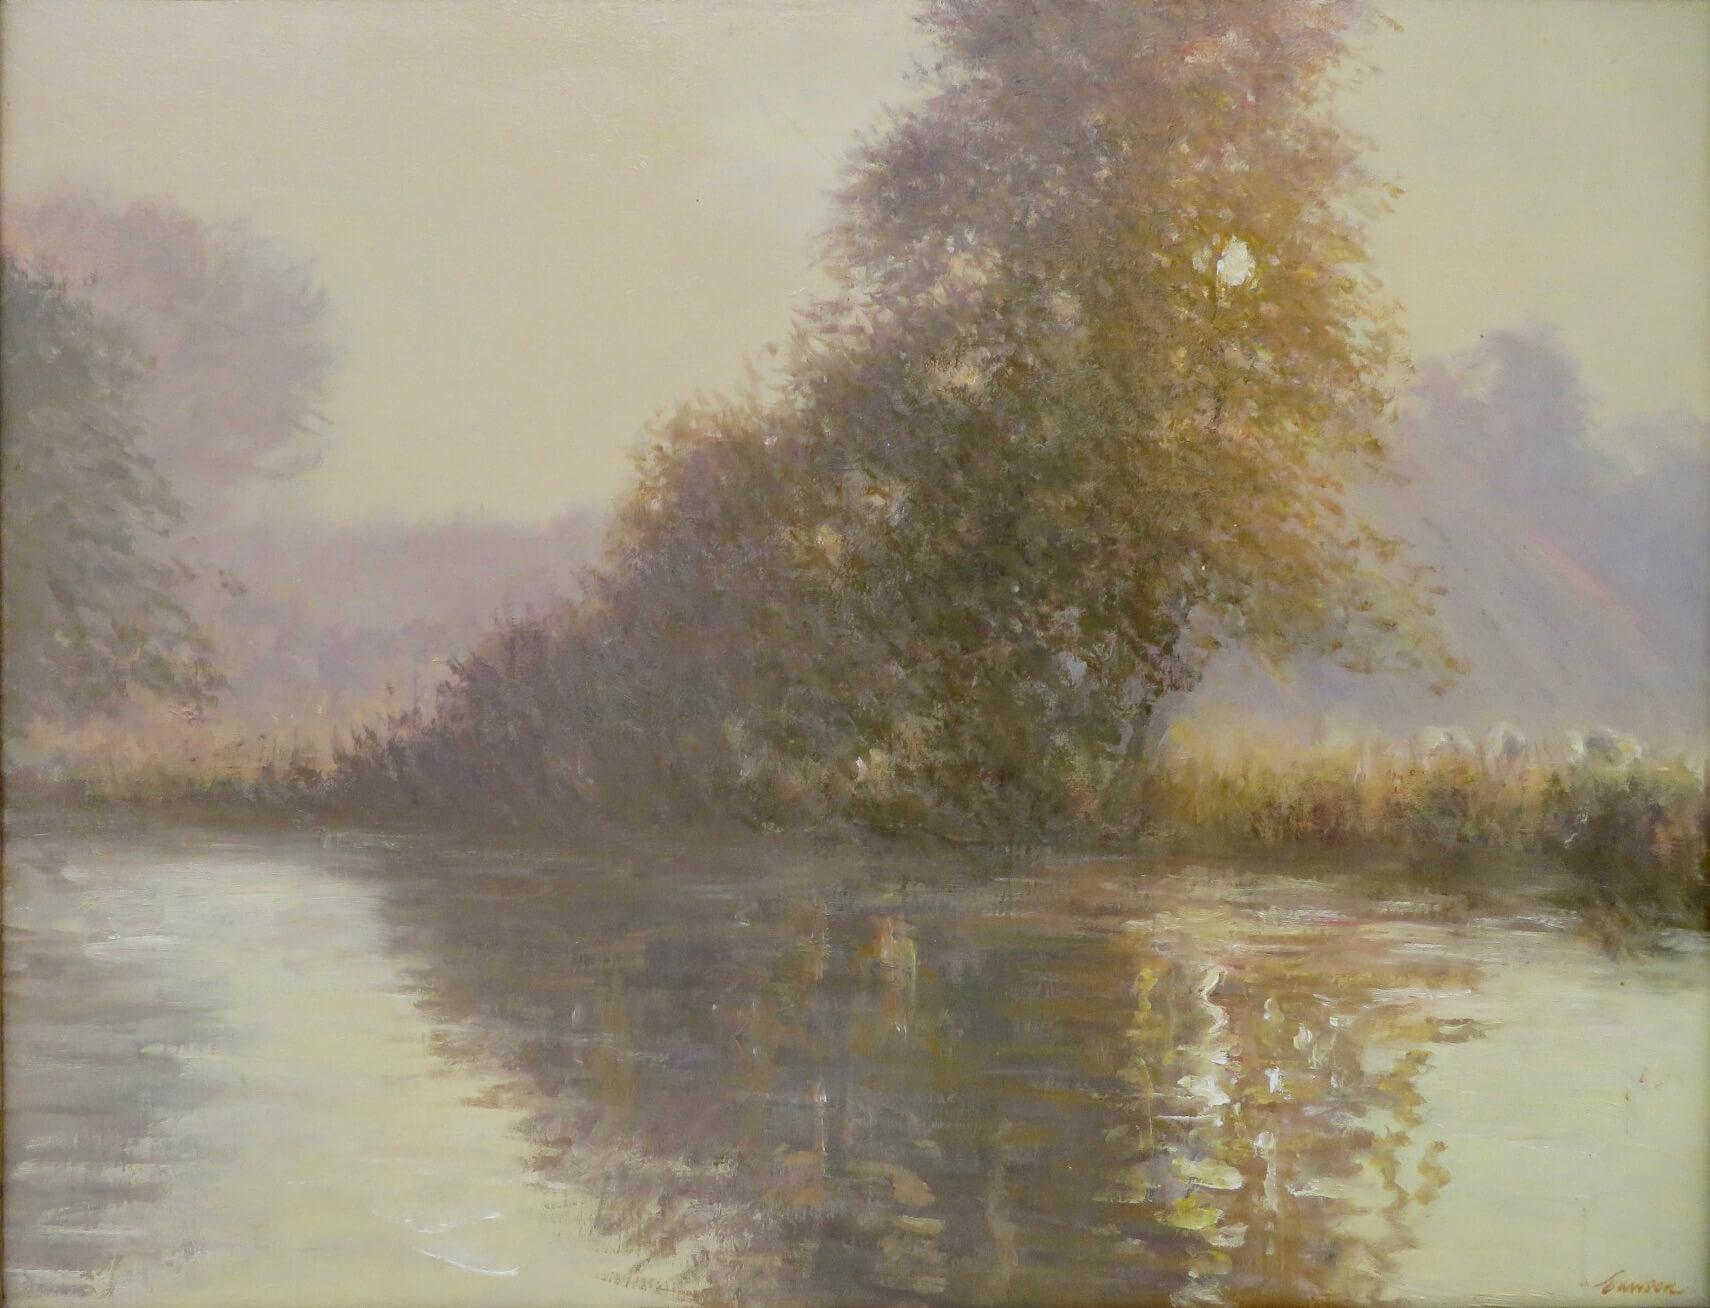 ARTIST: Edward Dawson NEAC (1941-1999) British
TITLE: “Morning Sunlight The River Dronne France”
SIGNED: lower right
MEDIUM: oil on canvas
SIZE: 58cm x 47cm inc frame
CONDITION: excellent
DETAIL: Born in Northumberland in 1941, Edward studied Fine